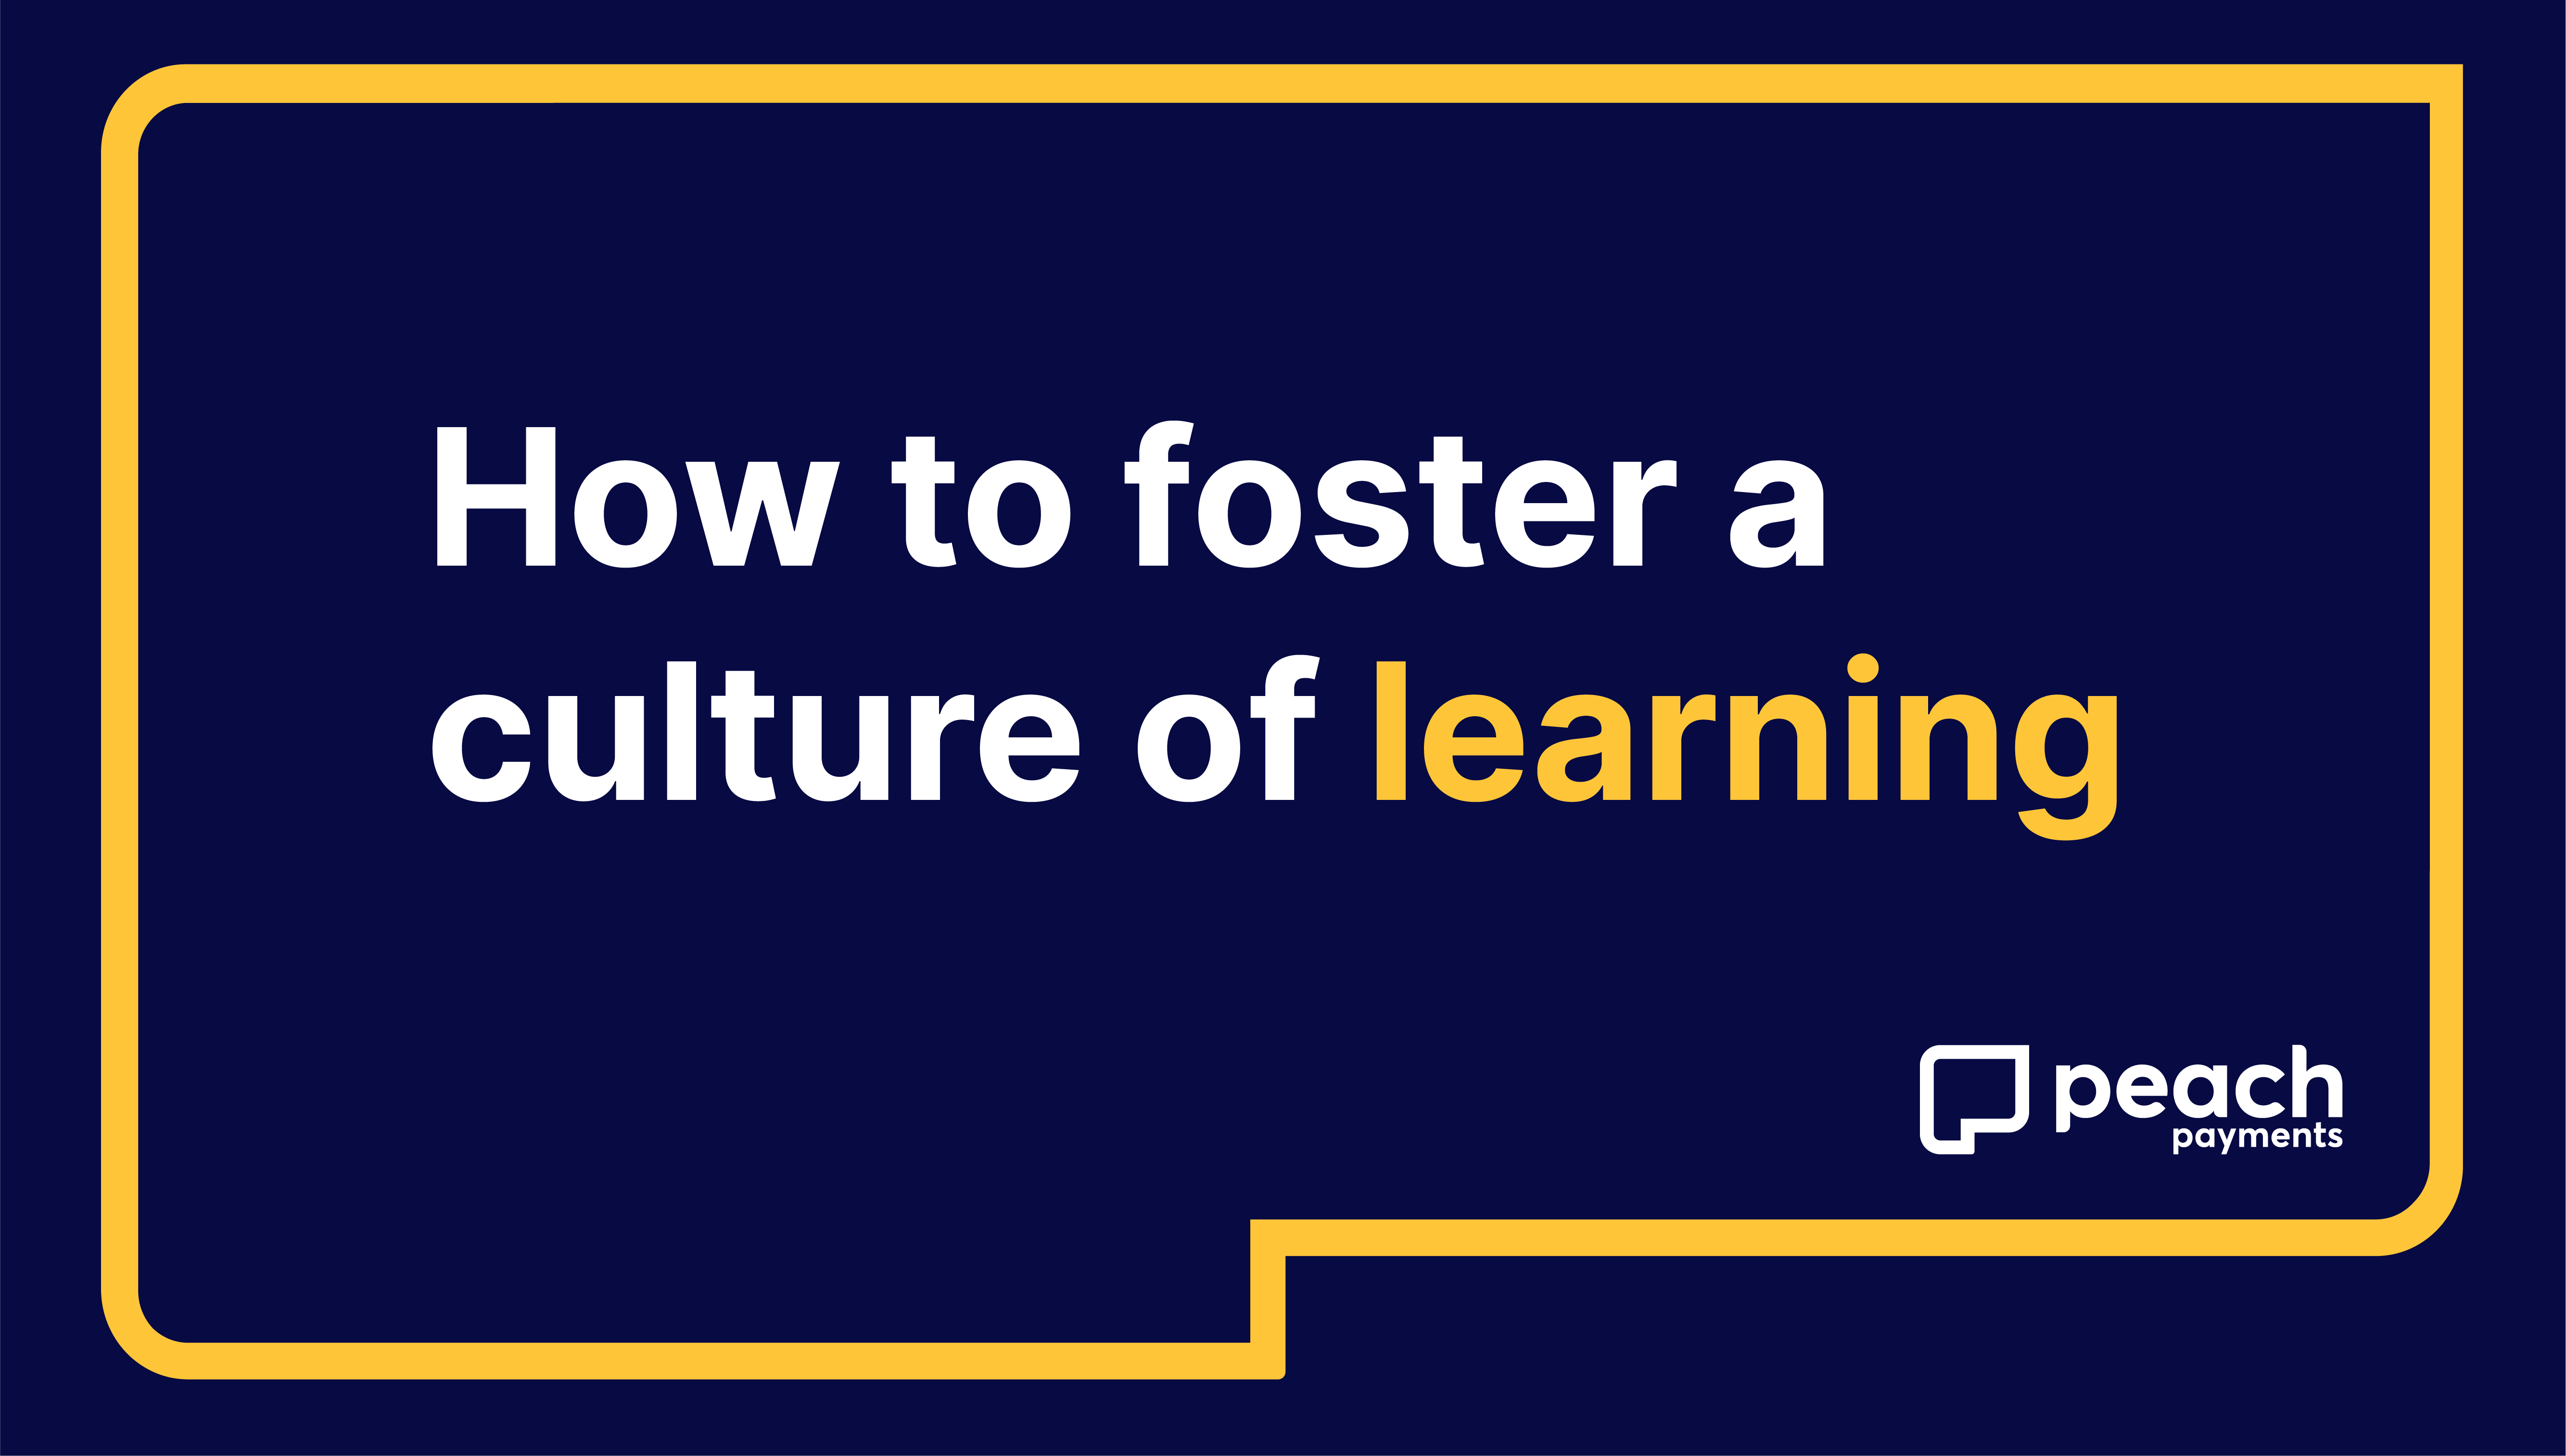 How to foster a culture of learning that helps your business stay competitive in a digital era